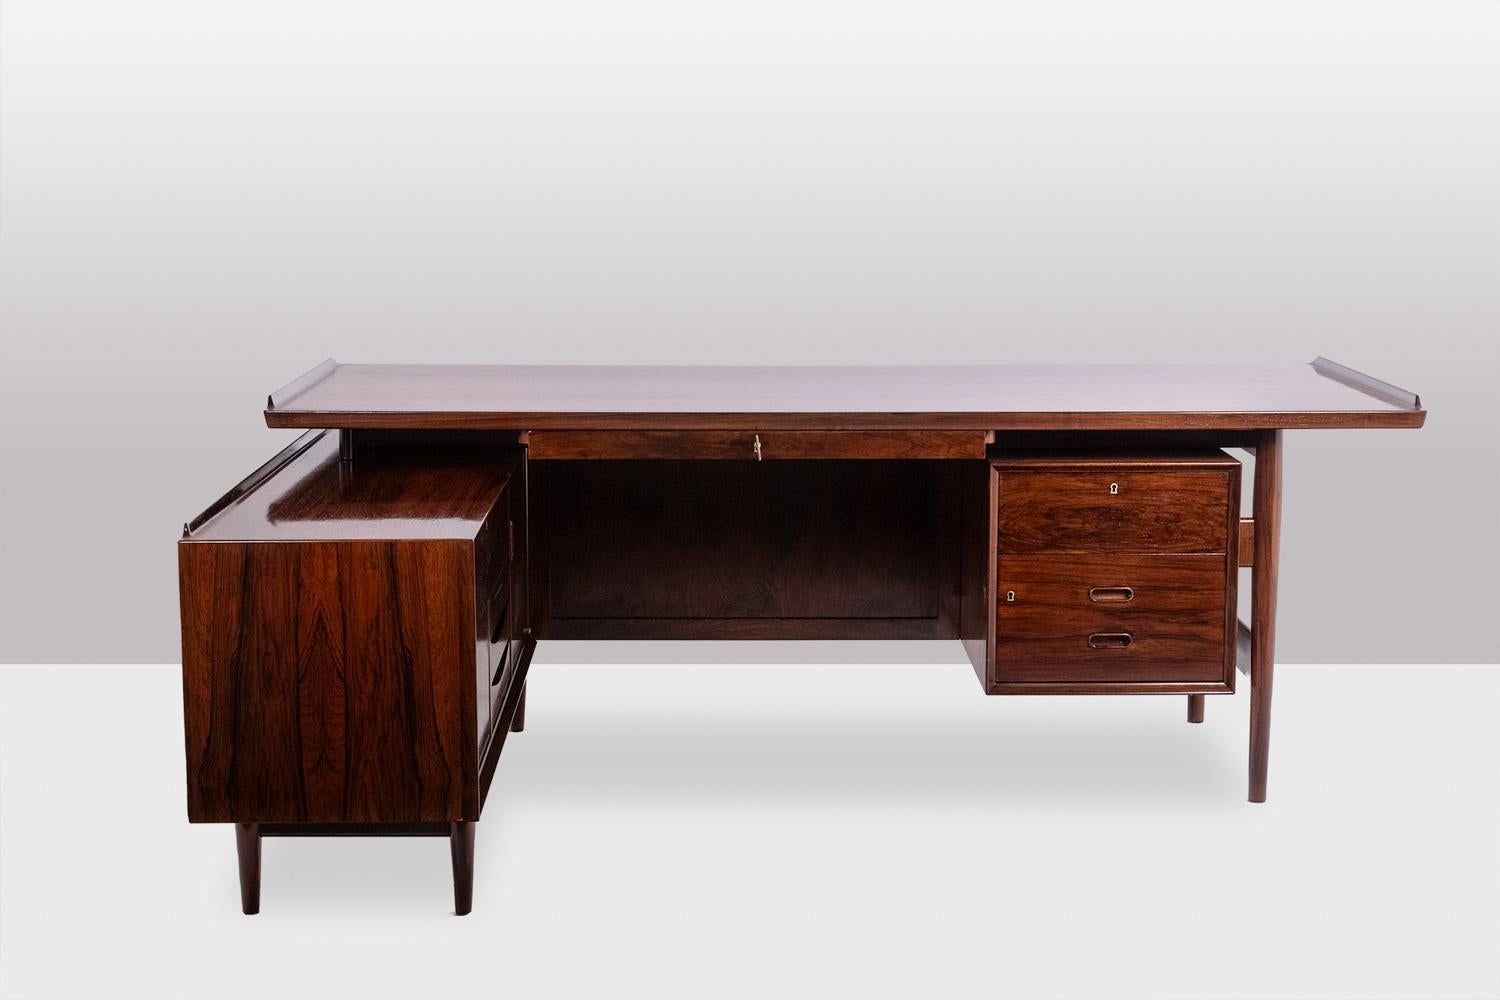 Arne Vodder for Sibast.

Corner desk in rosewood, opening on the front with a box with three drawers and a large drawer in the central part. Drawers and doors on the left side. Straight base.

Danish work realized in the 1970s.

Dimensions:

Tray: H